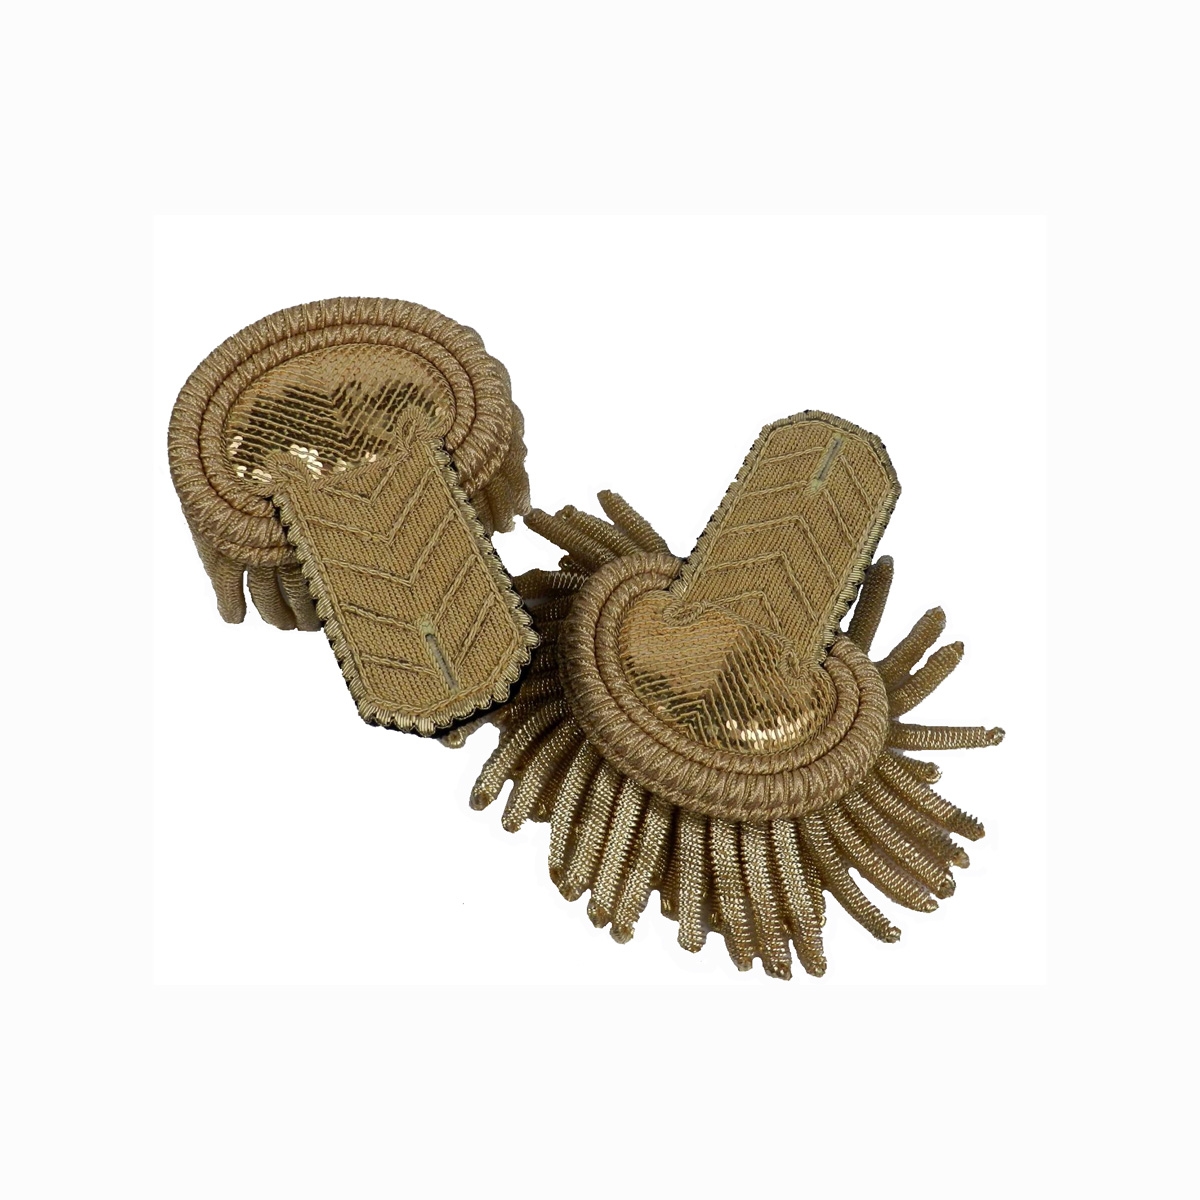 Dragoon senior epaulettes shiny gold color customized military Uniform Accouterments suppliers